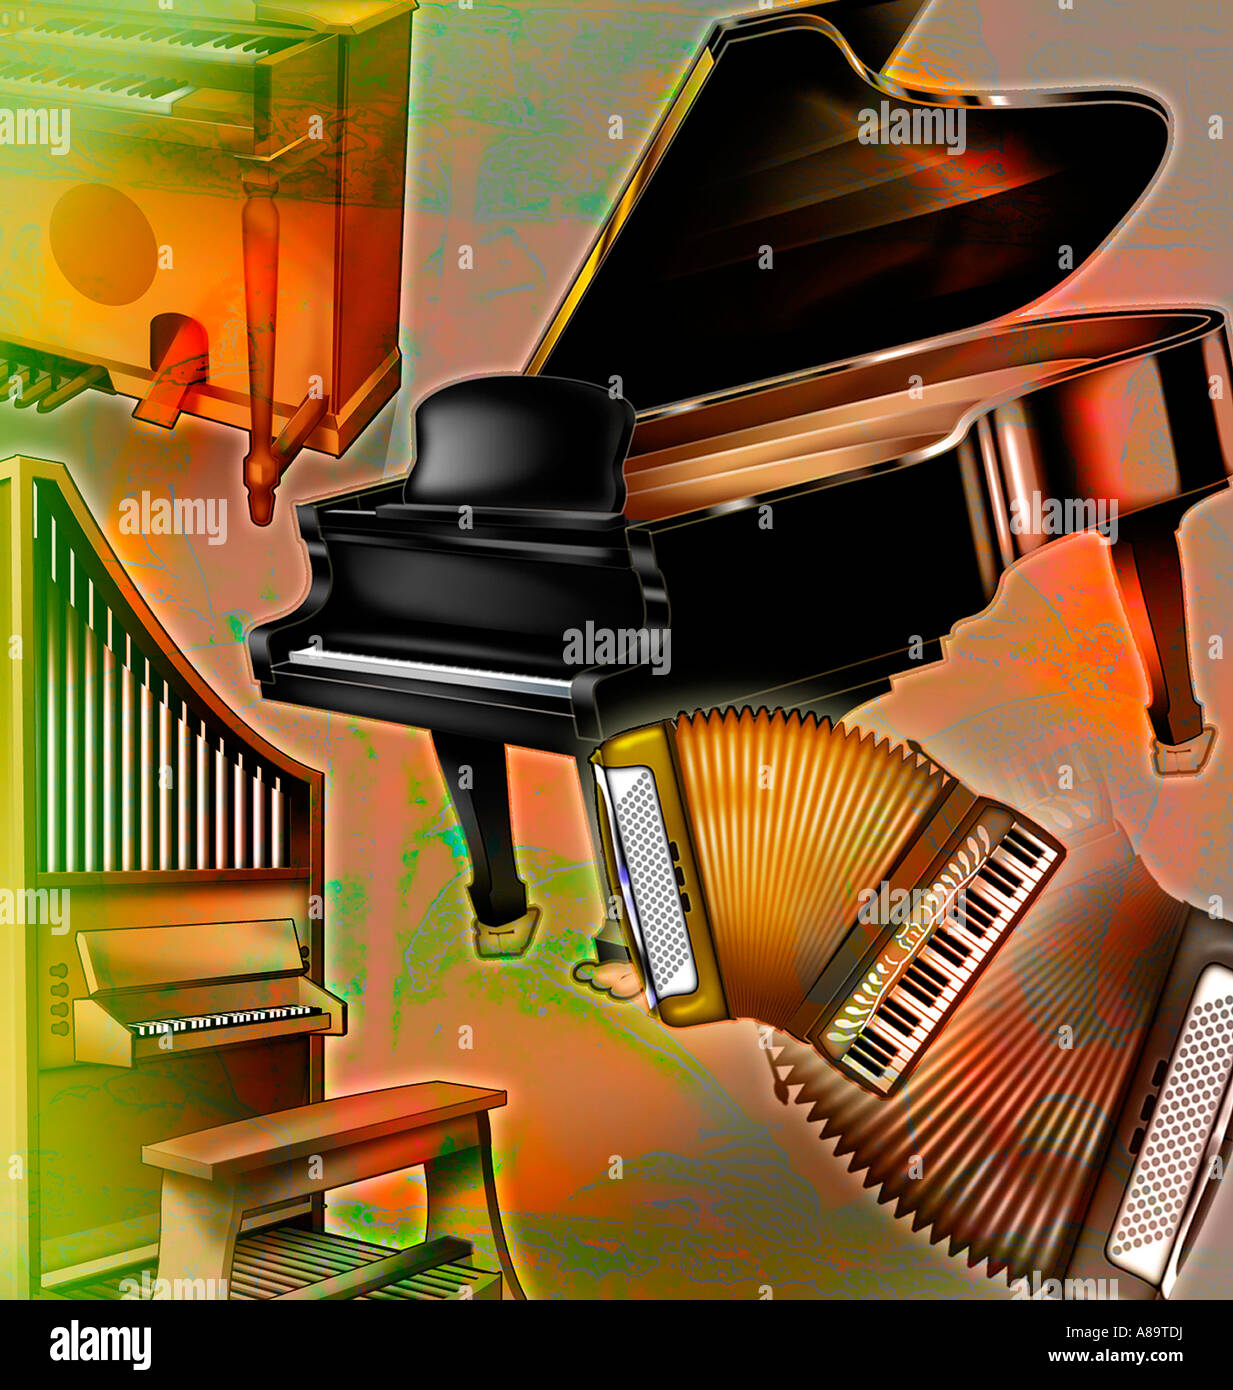 Musical instruments with keyboards Stock Photo